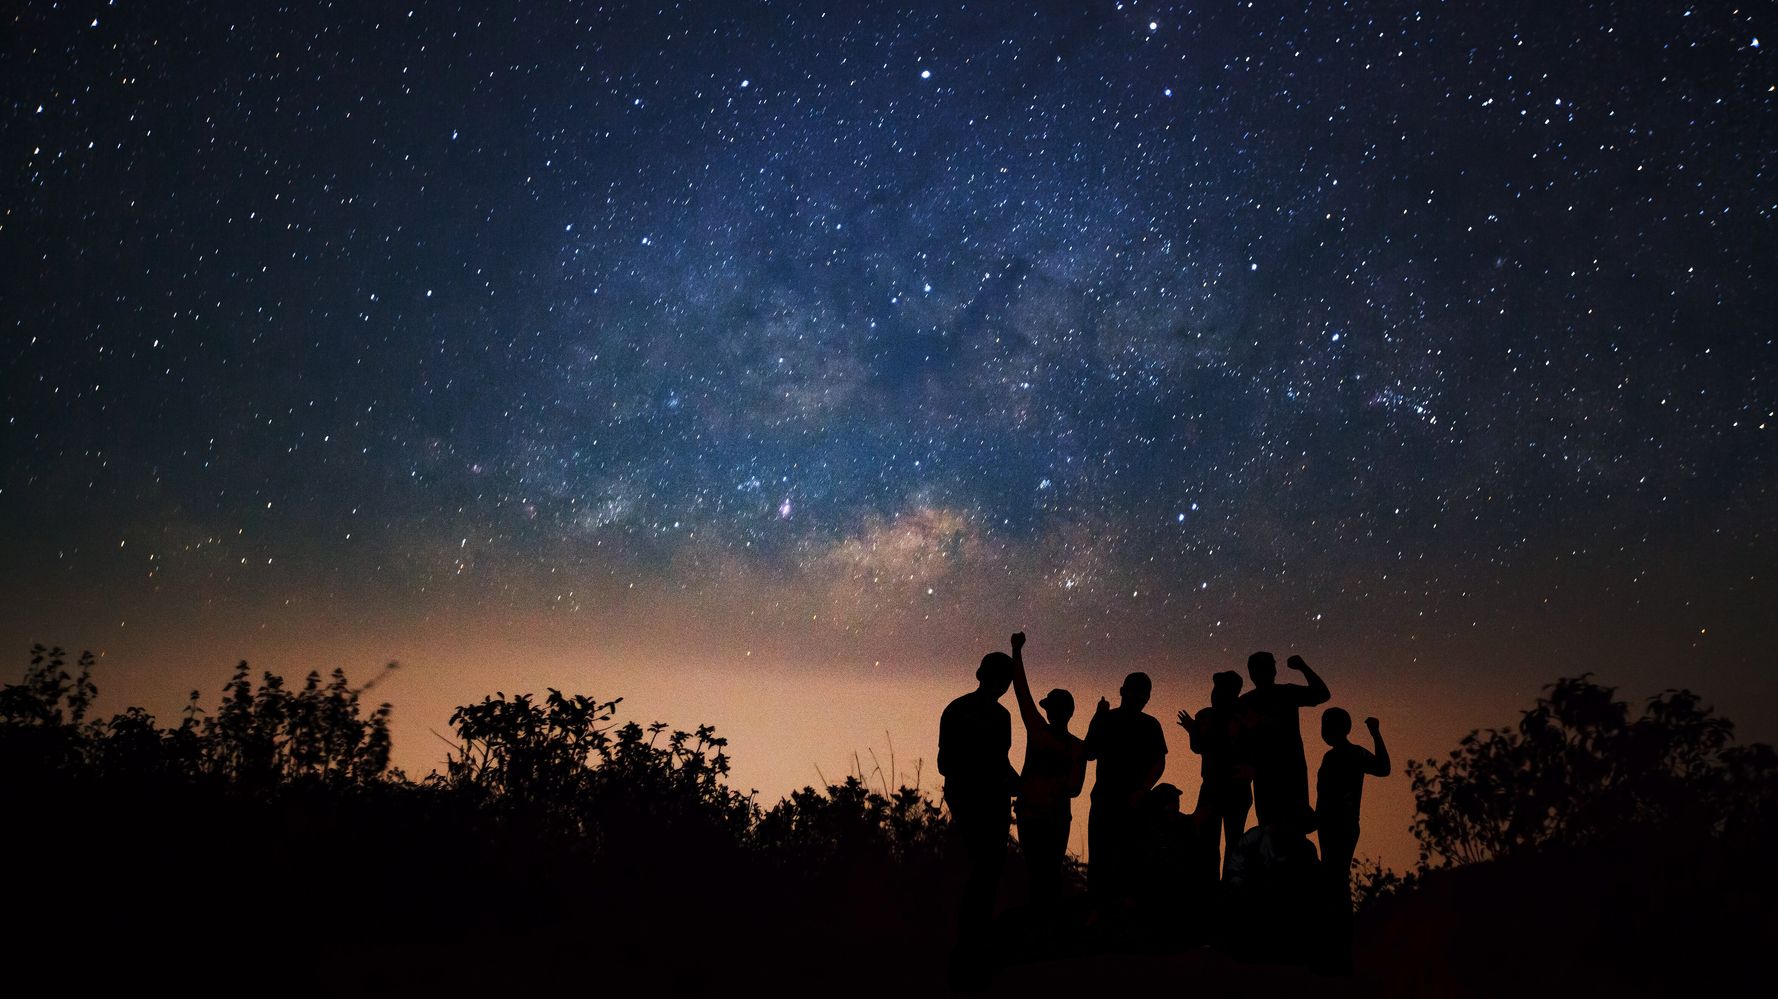 These Are Some Of The Best Places For Stargazing In The U.S.